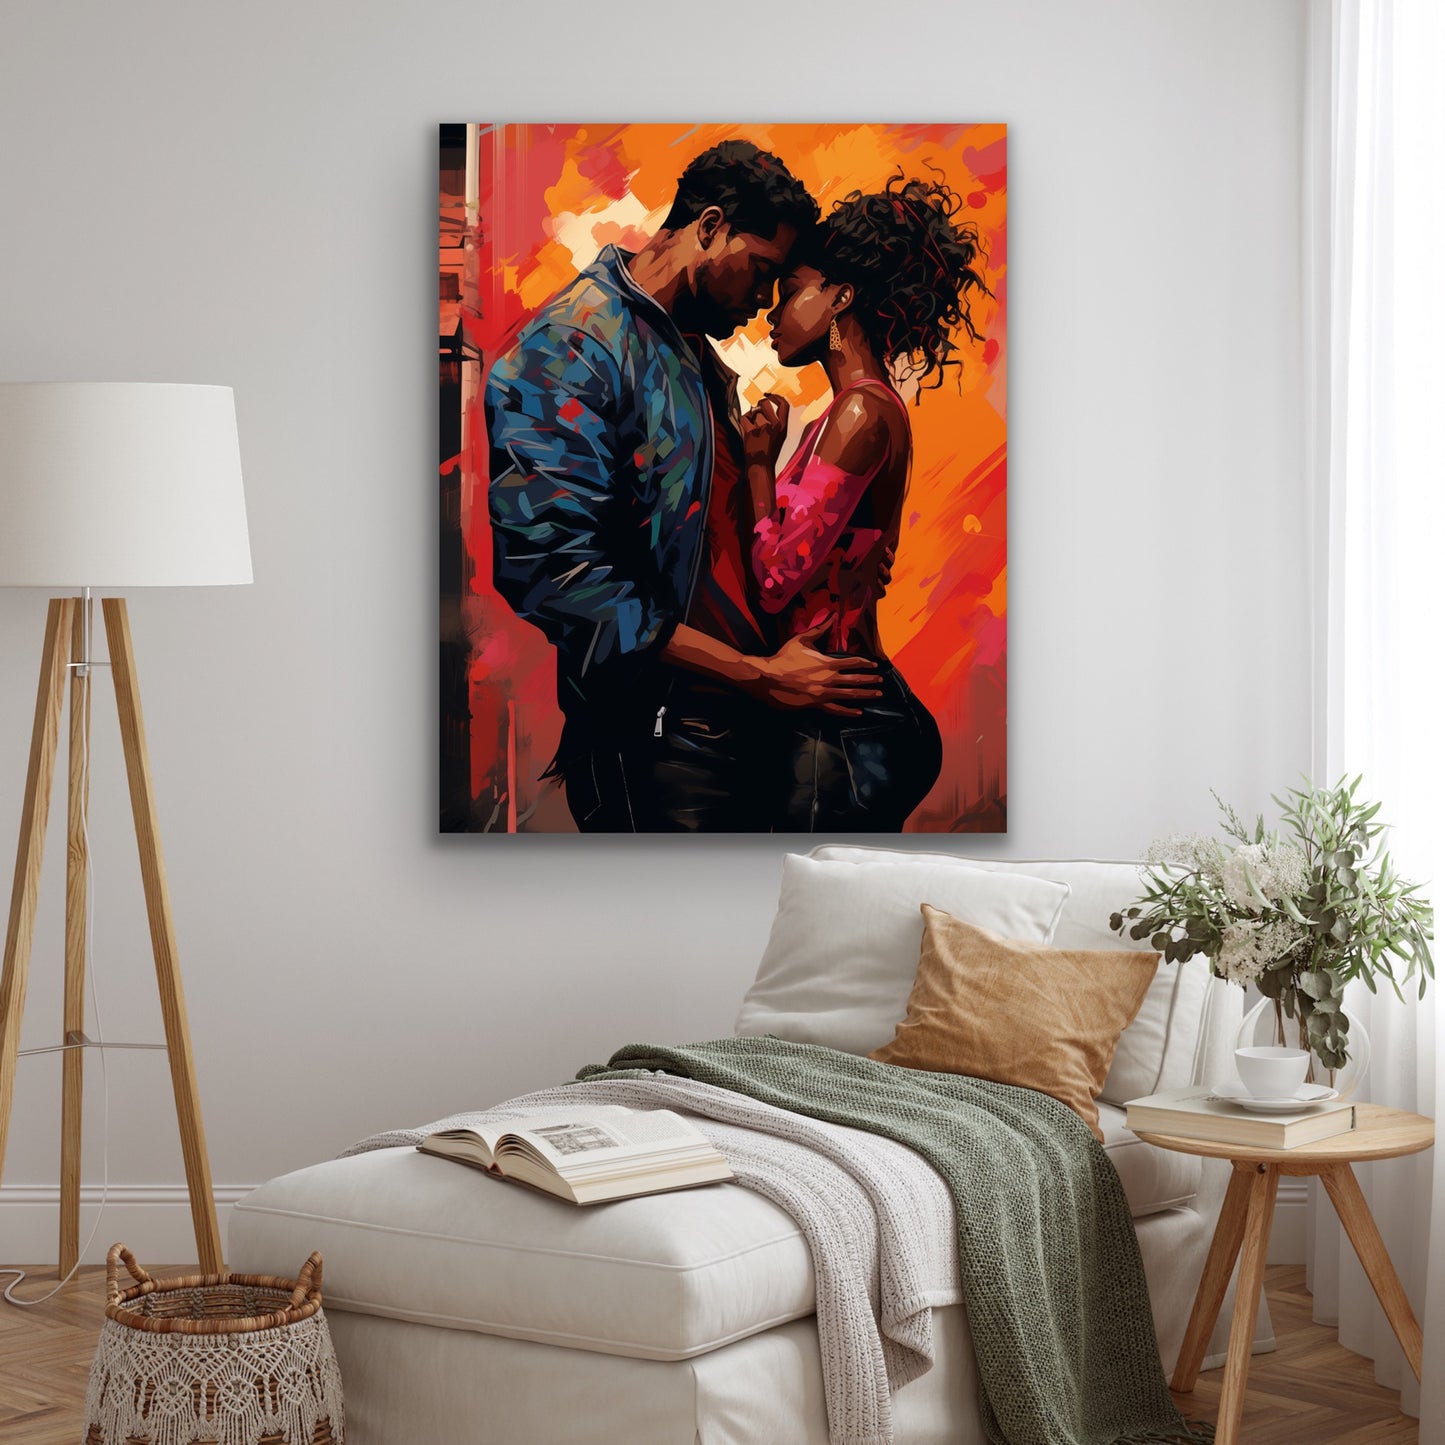 You and I | Stretched Canvas Print Wall Art | Black Art | African American Art | Black Love